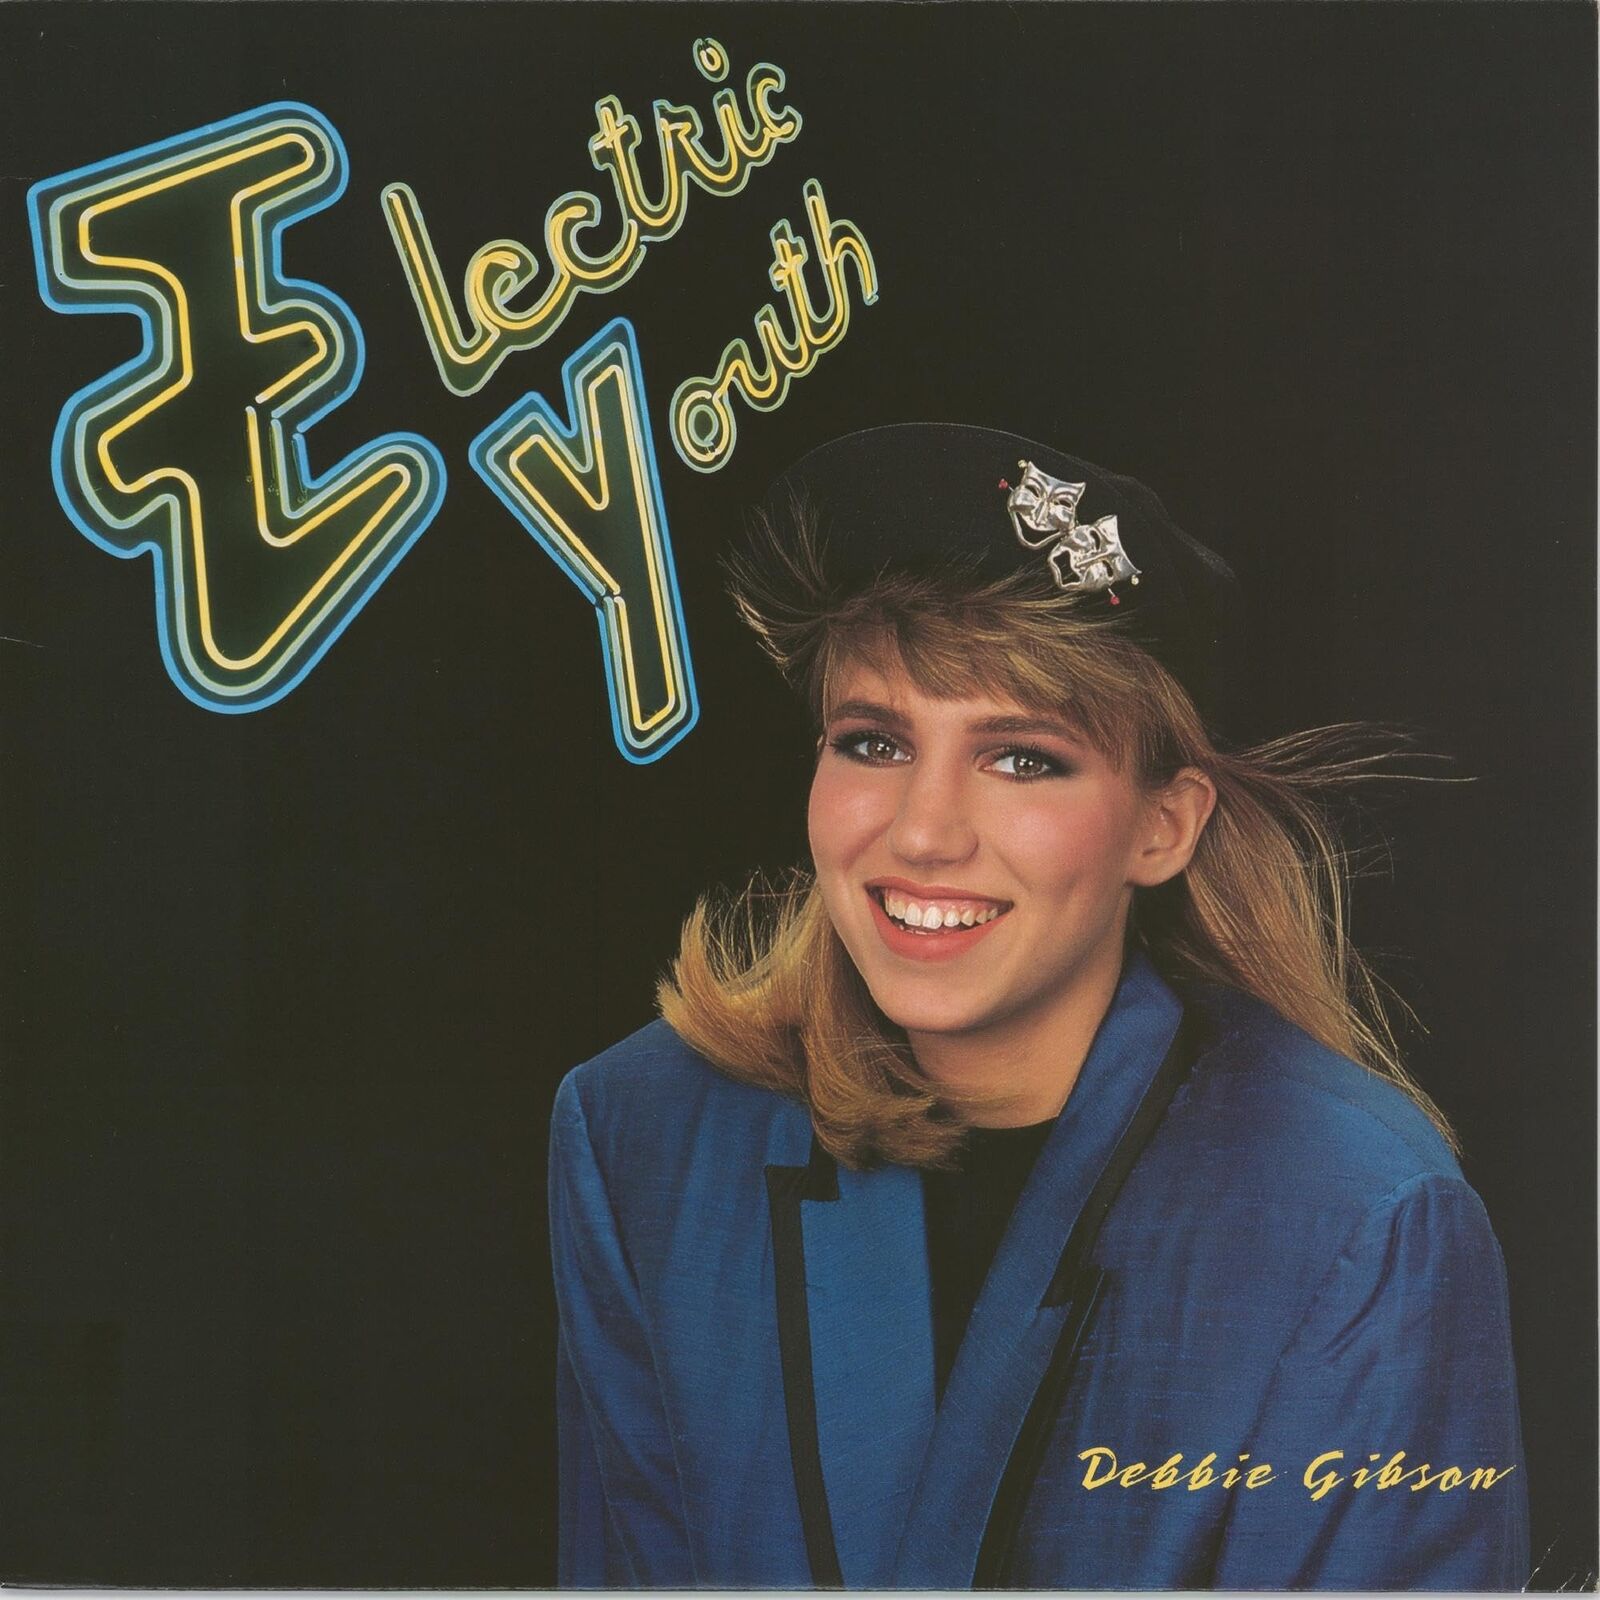 Debbie Gibson Electric Youth Translucent Gold (Vinyl)